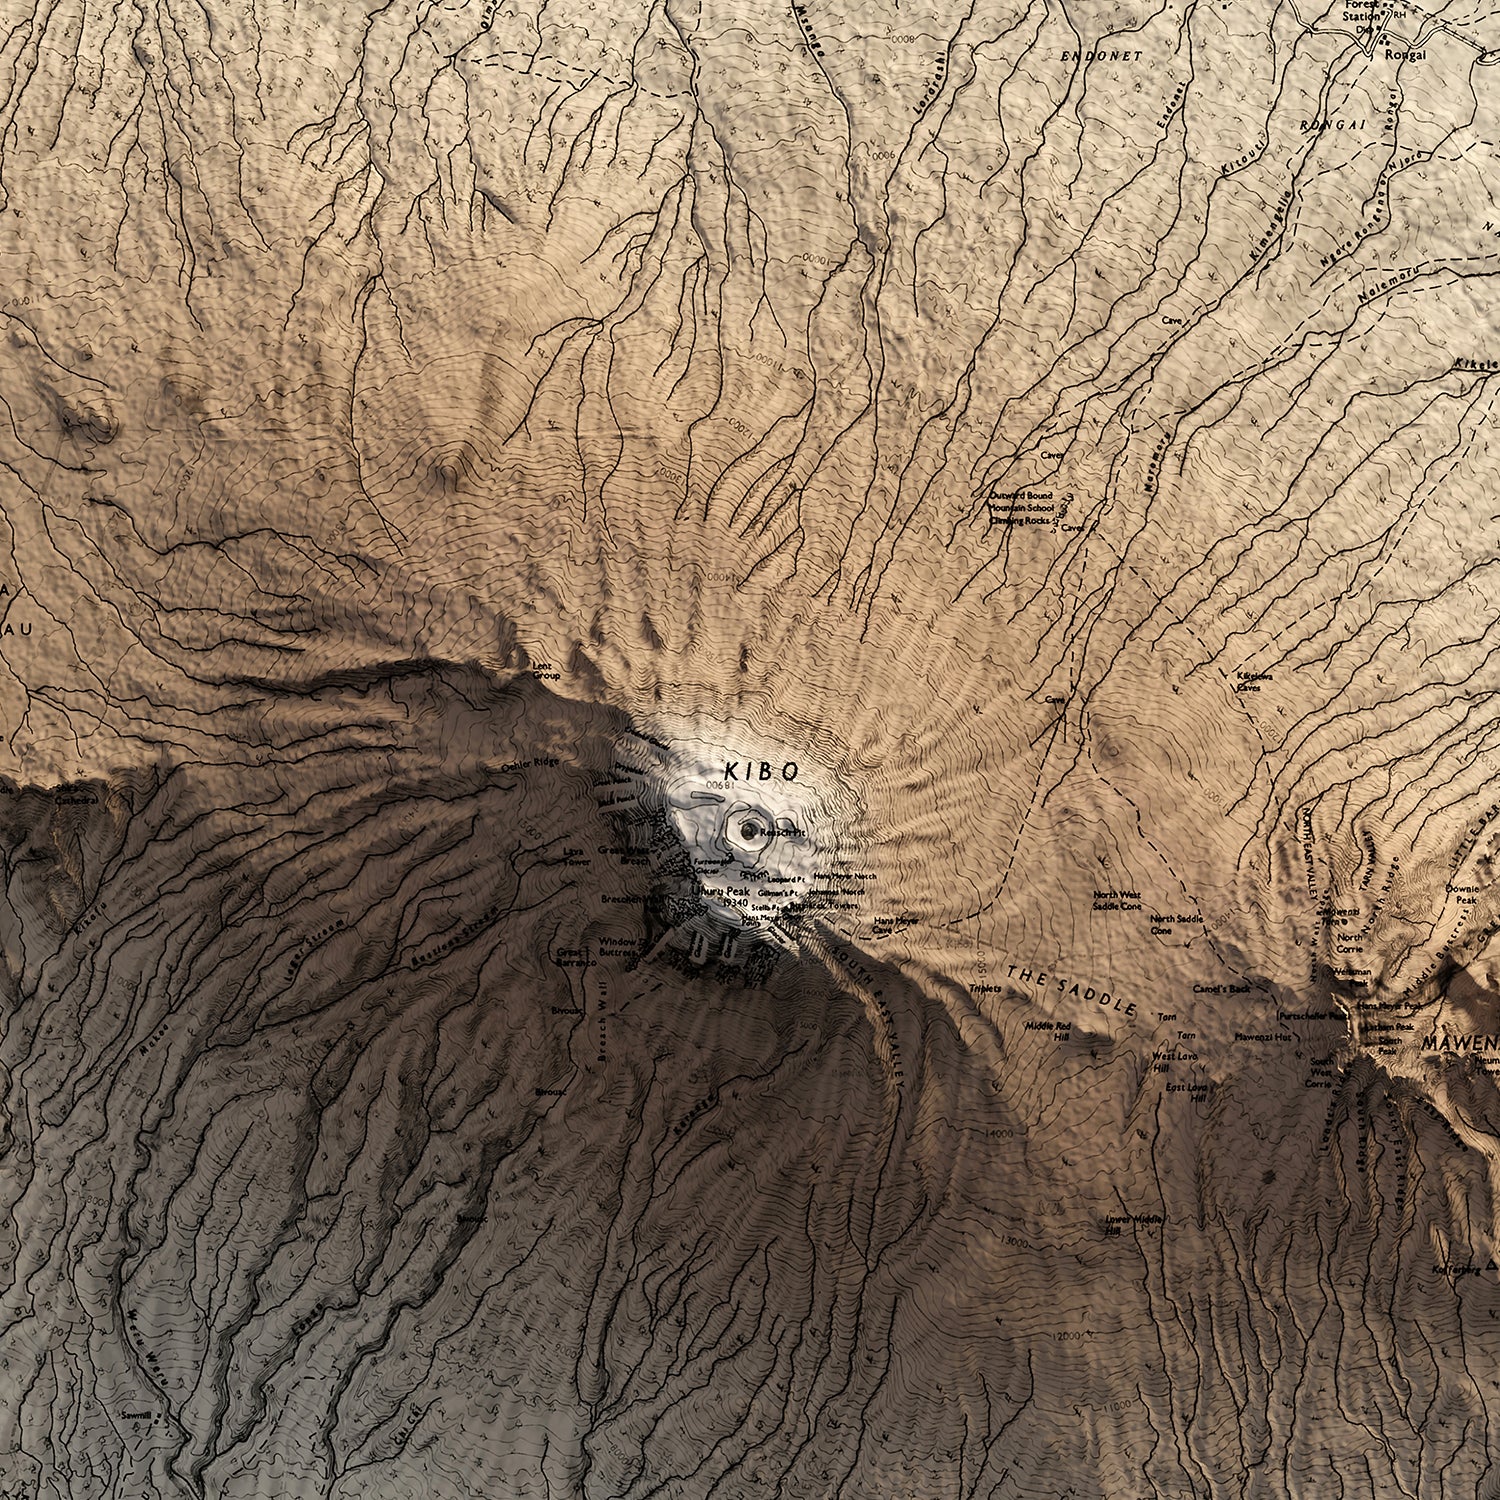 Mount Kilimanjaro - Vintage Shaded Relief Map (1965)